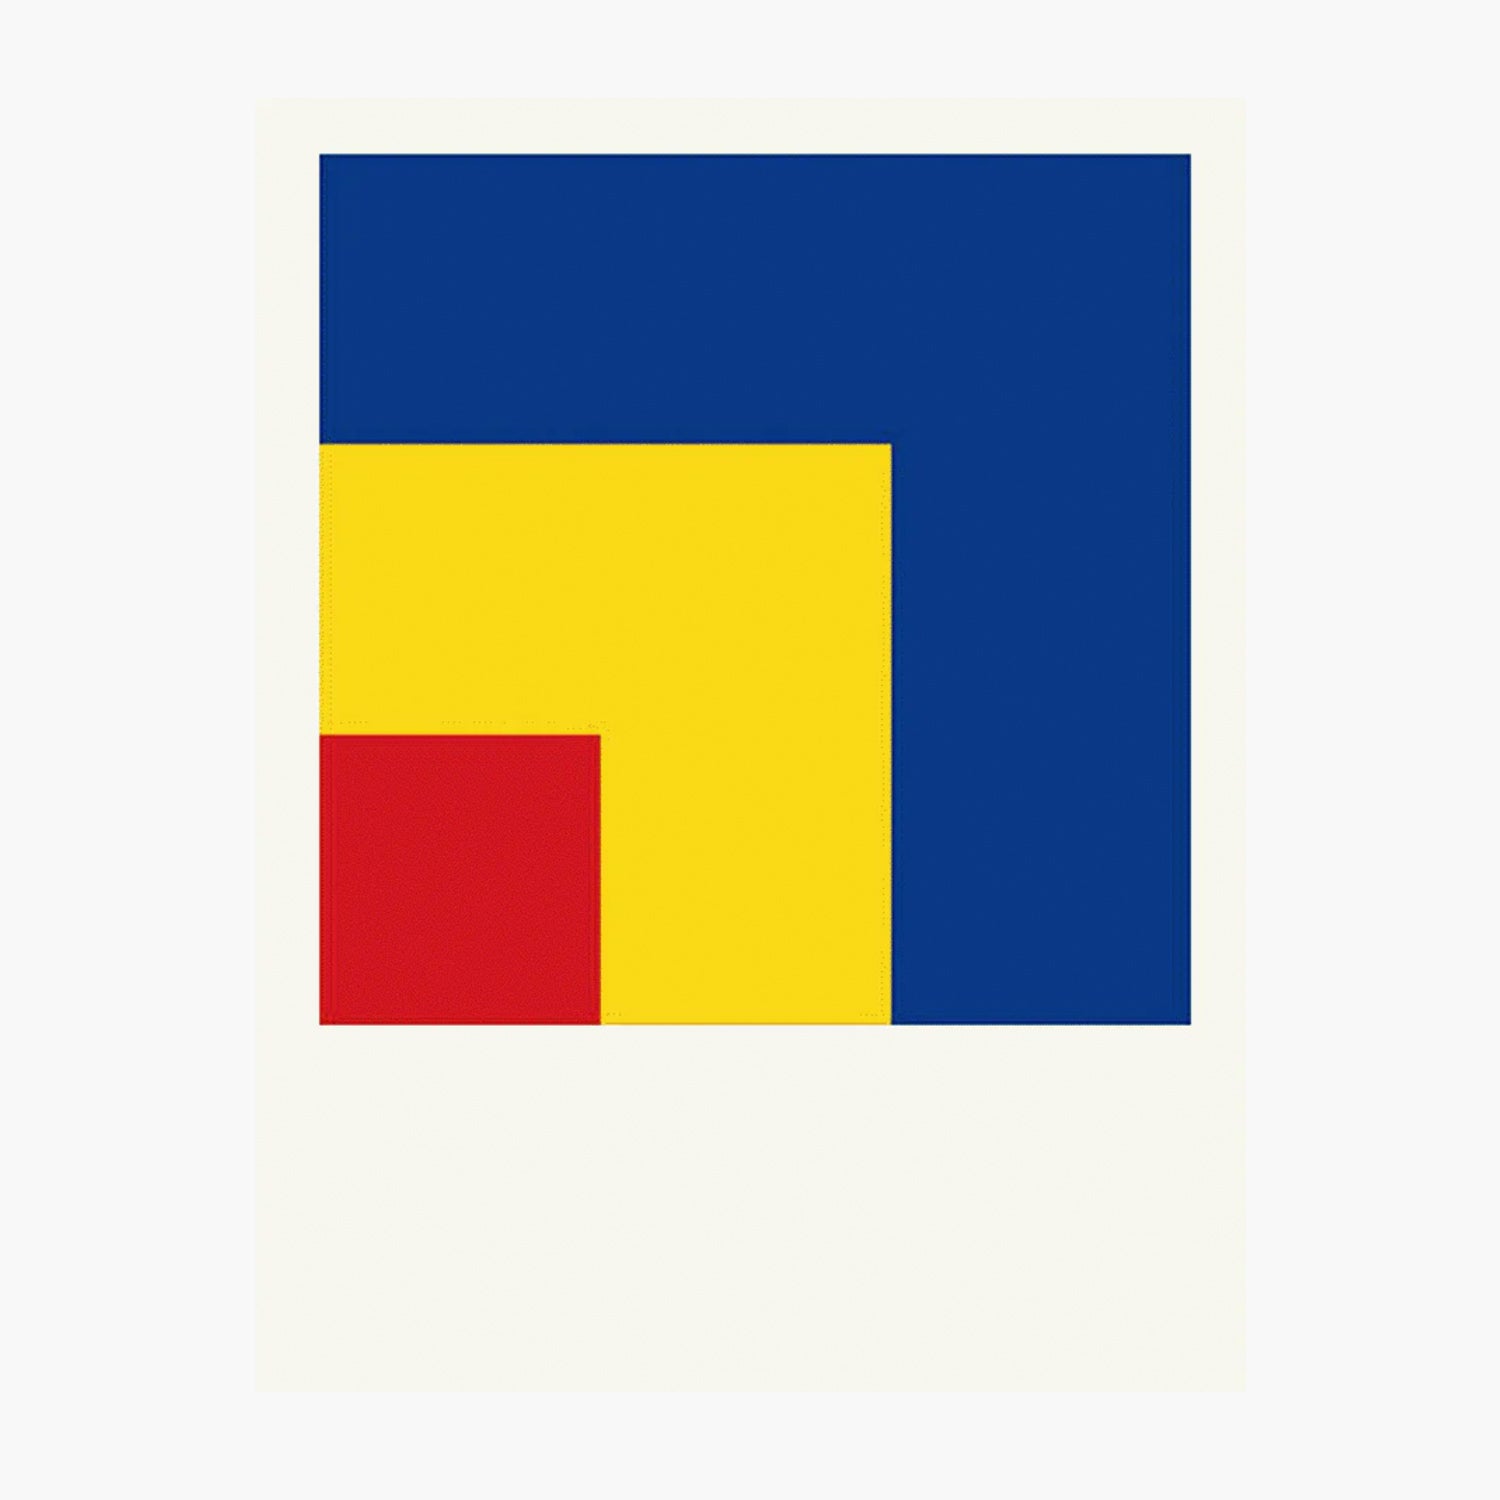 Ellsworth KELLY 'Red, Yellow, Blue, 1963' Lithographic Print